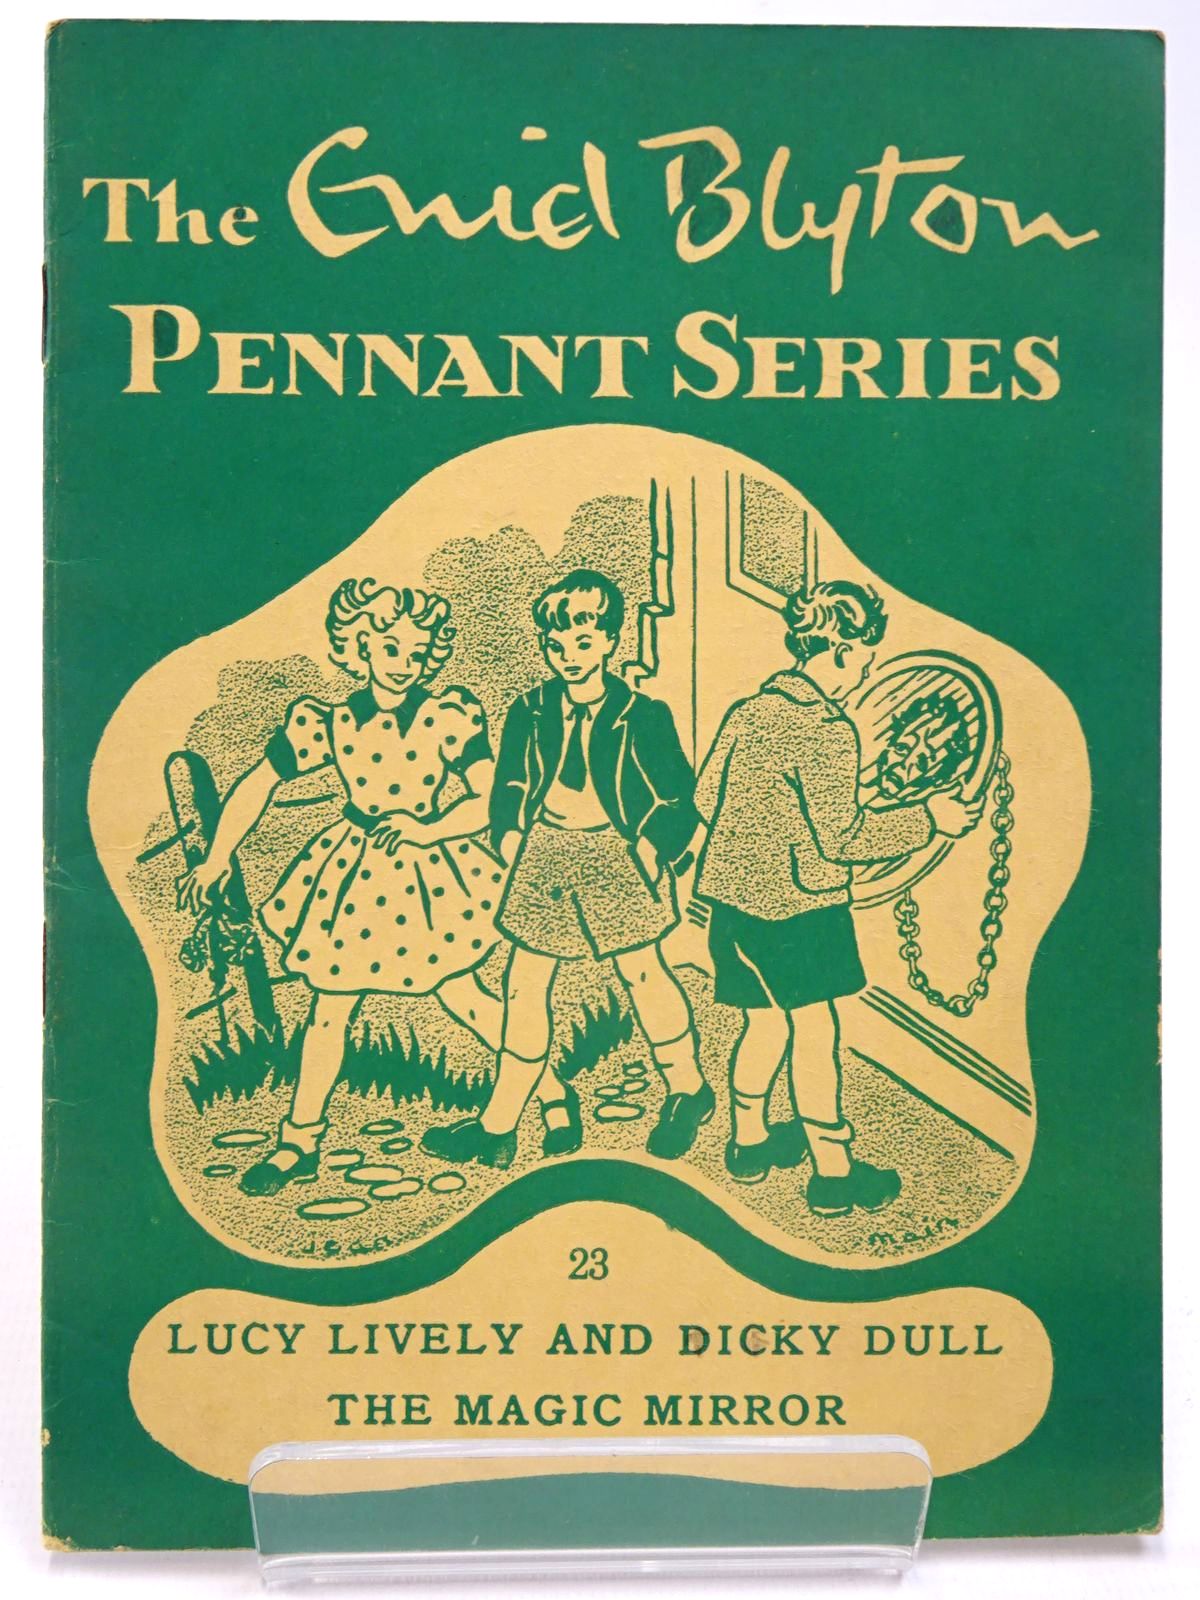 Photo of THE ENID BLYTON PENNANT SERIES No. 23 LUCY LIVELY AND DICKY DULL / THE MAGIC MIRROR written by Blyton, Enid illustrated by Soper, Eileen
Main, Jean published by Macmillan & Co. Ltd. (STOCK CODE: 2130516)  for sale by Stella & Rose's Books